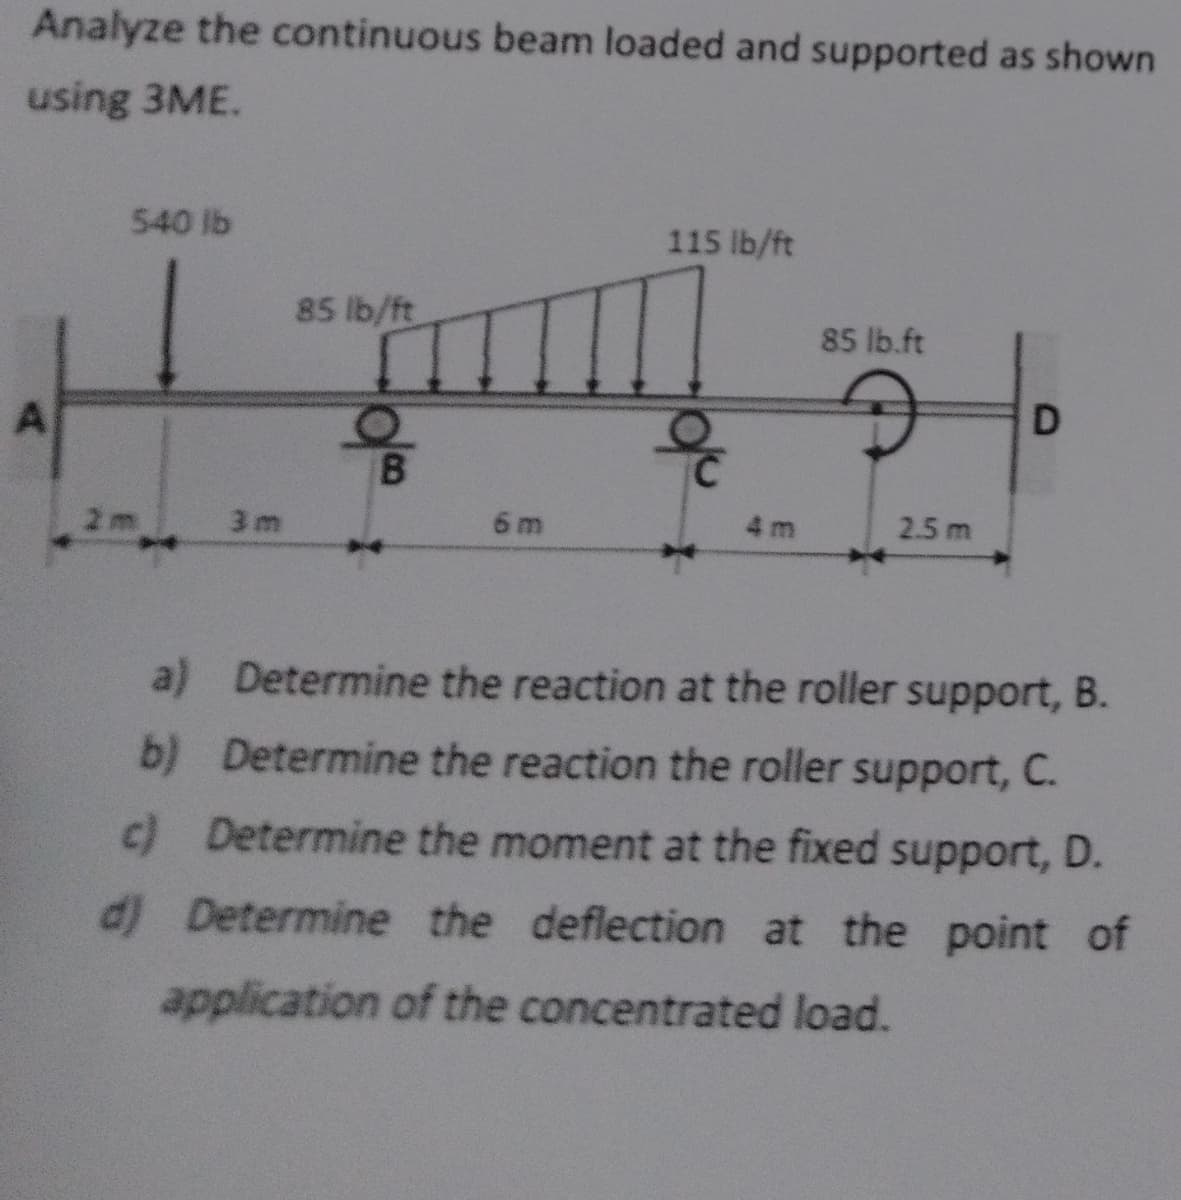 Analyze the continuous beam loaded and supported as shown
using 3ME.
A
540 lb
115 lb/ft
85 lb/ft
85 lb.ft
D
B
2m
3m
6 m
4 m
2.5 m
a) Determine the reaction at the roller support, B.
b) Determine the reaction the roller support, C.
c) Determine the moment at the fixed support, D.
d) Determine the deflection at the point of
application of the concentrated load.